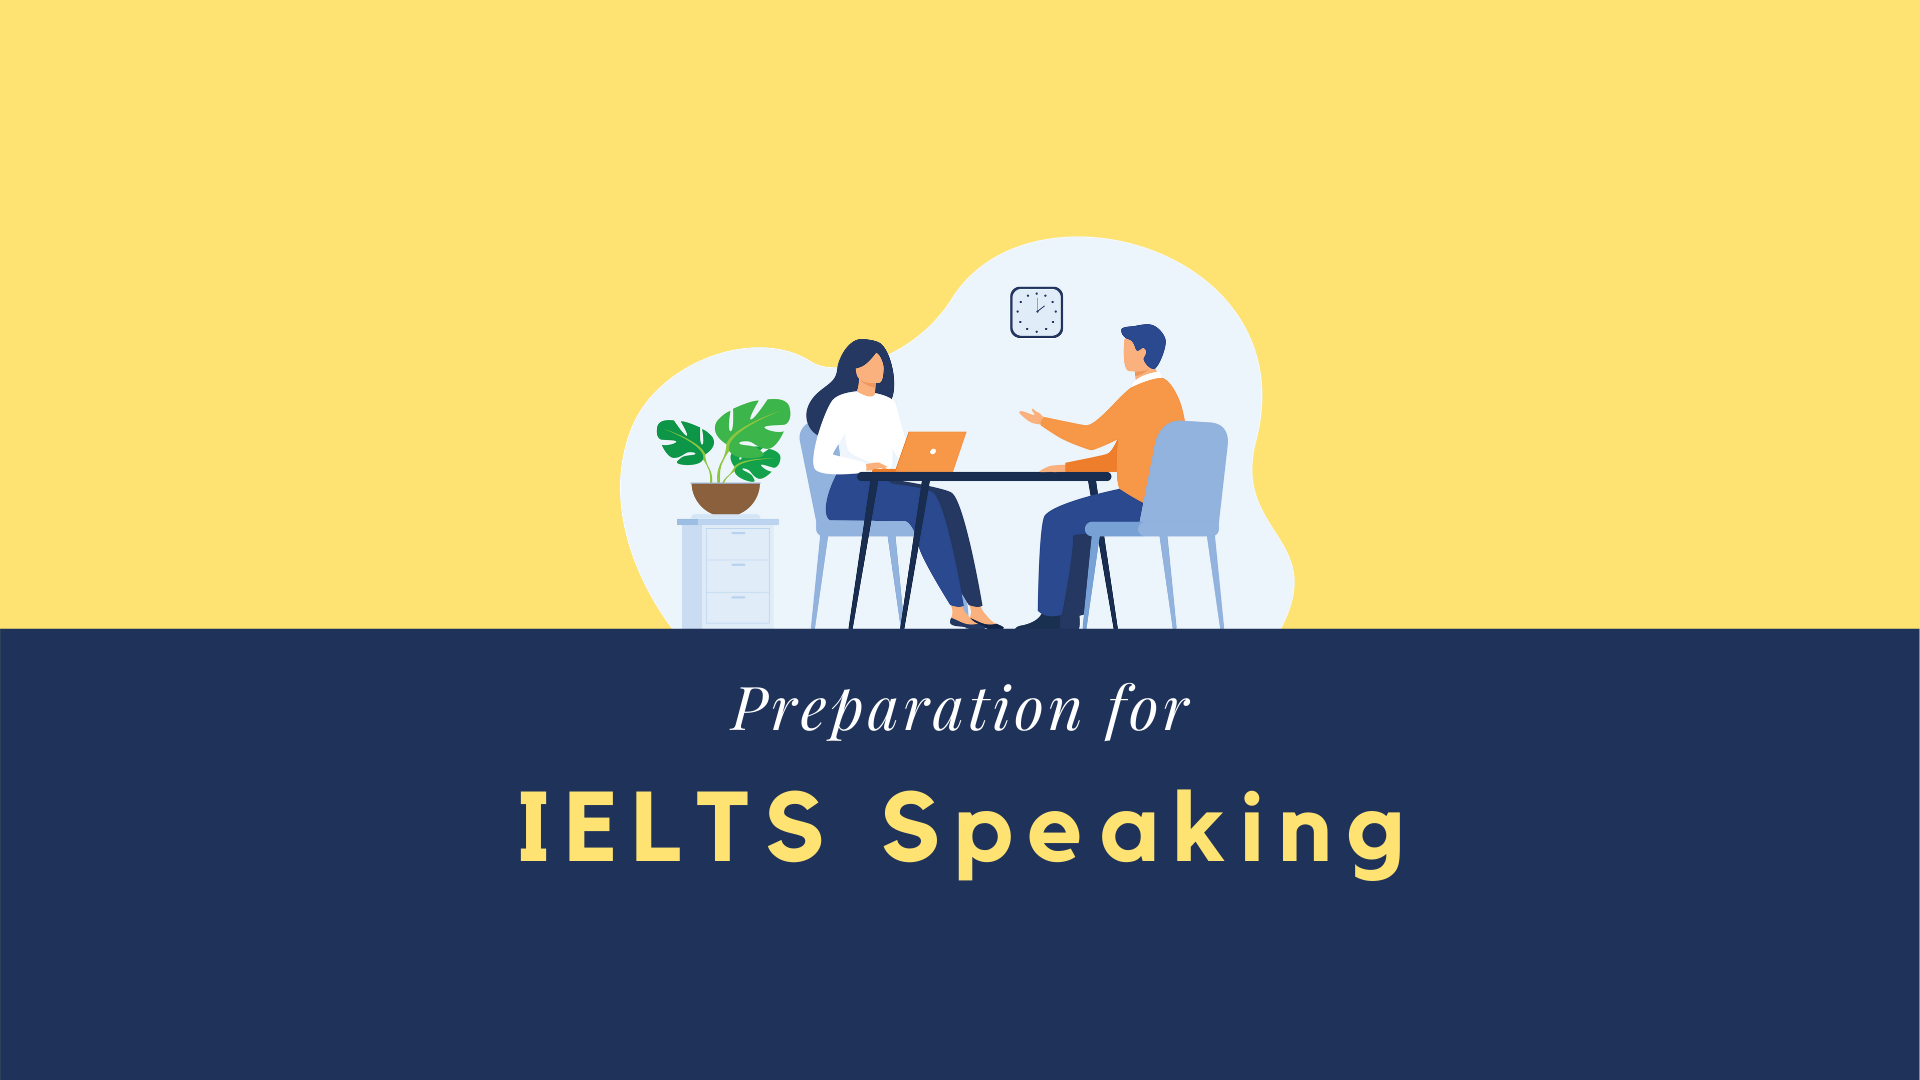 Preparation for IELTS Speaking course image